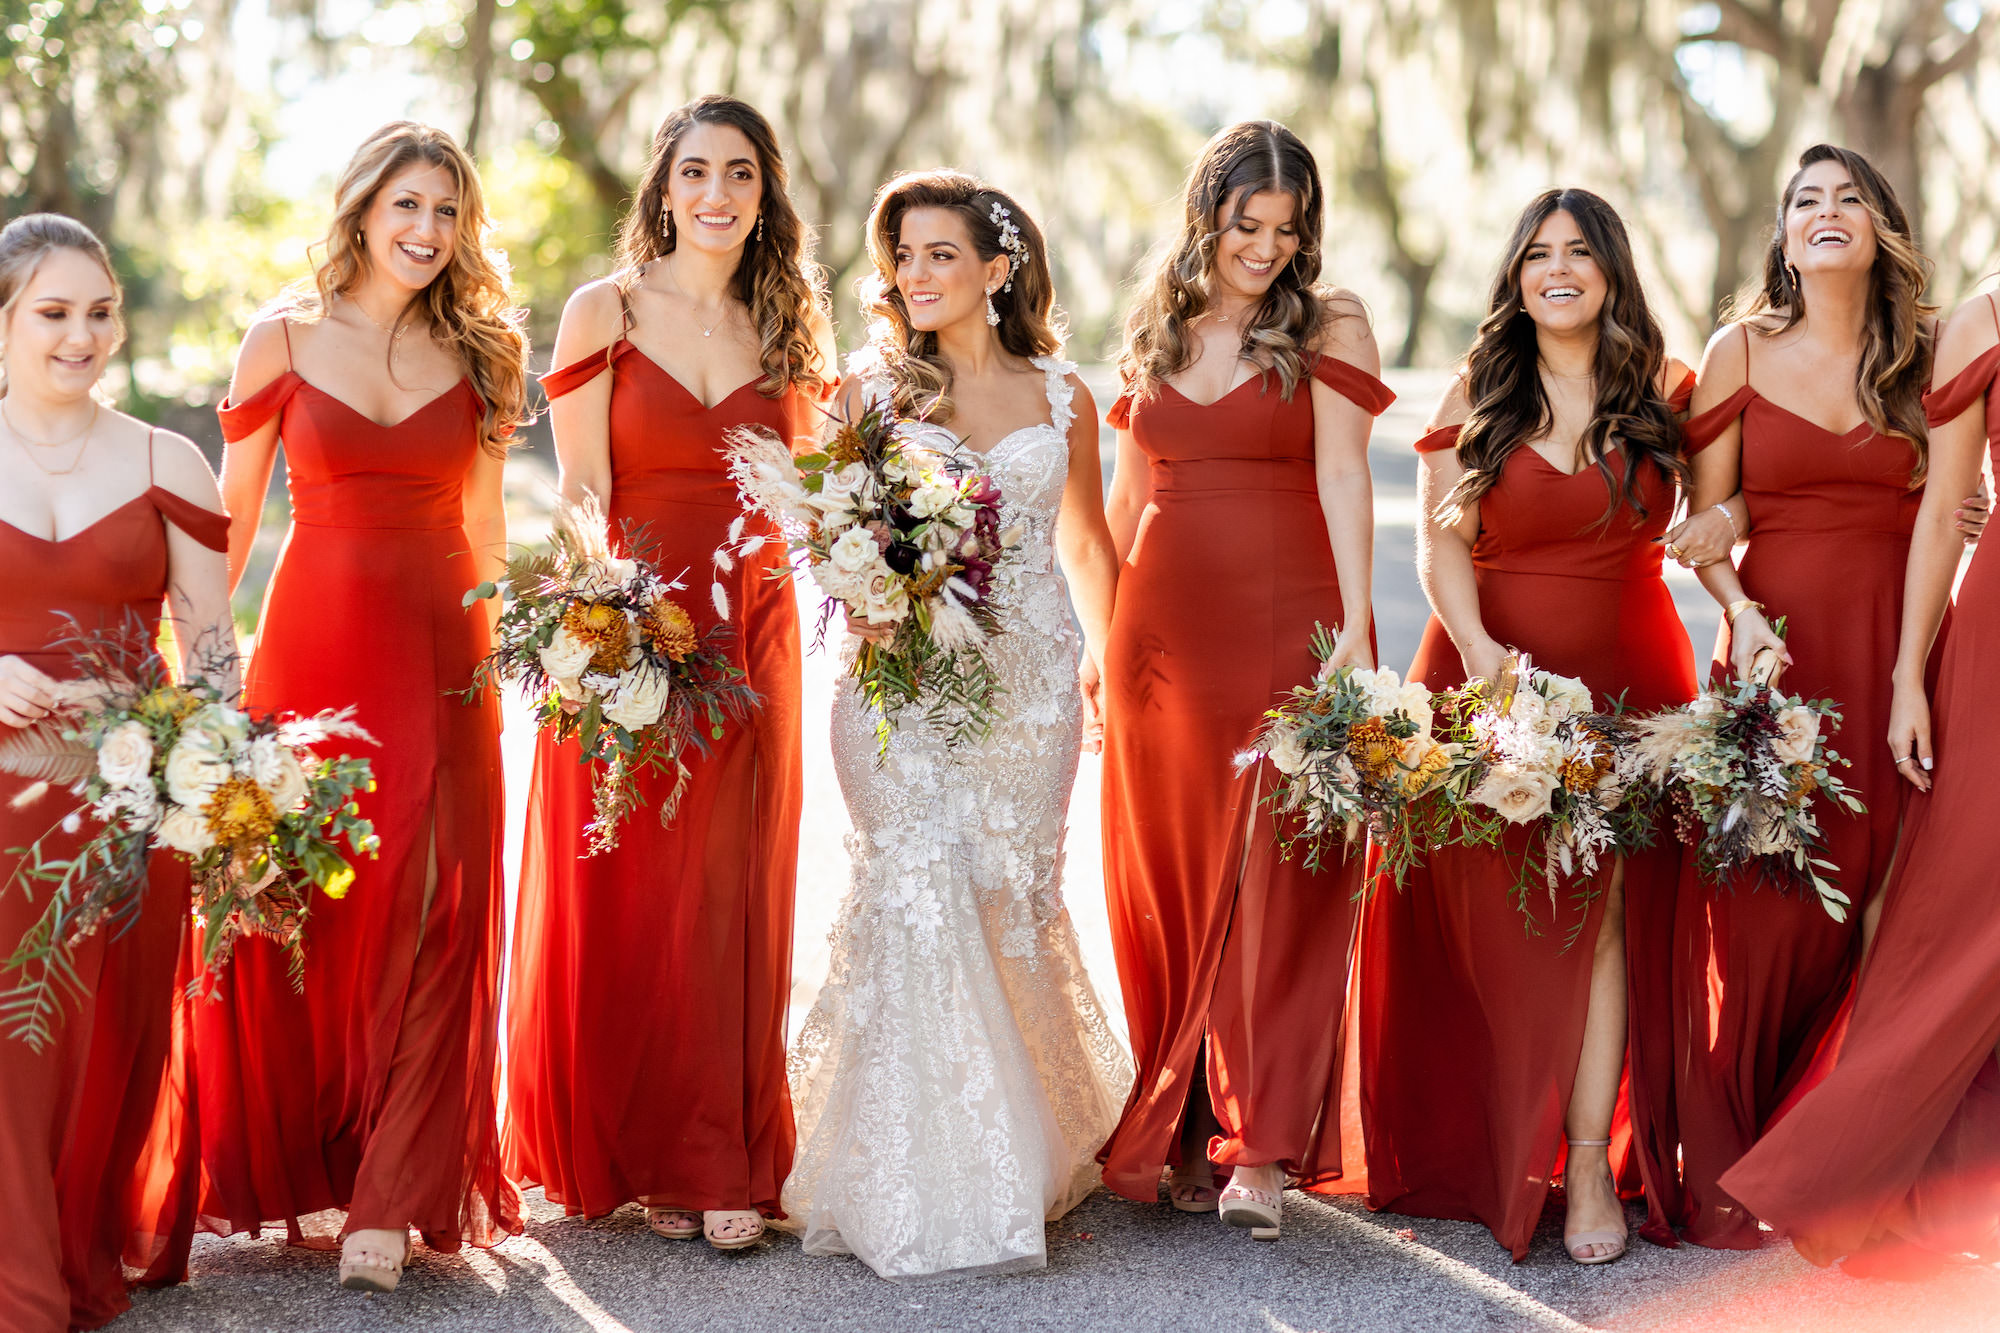 Fall Boho Bridal Party, Bride with Bridesmaids Wearing Matching Off the Shoulder Red Dresses Holding Ivory, Burnt Orange and Burgundy Floral Bouquets with Pampas Grass, Greenery and Dried Leaves